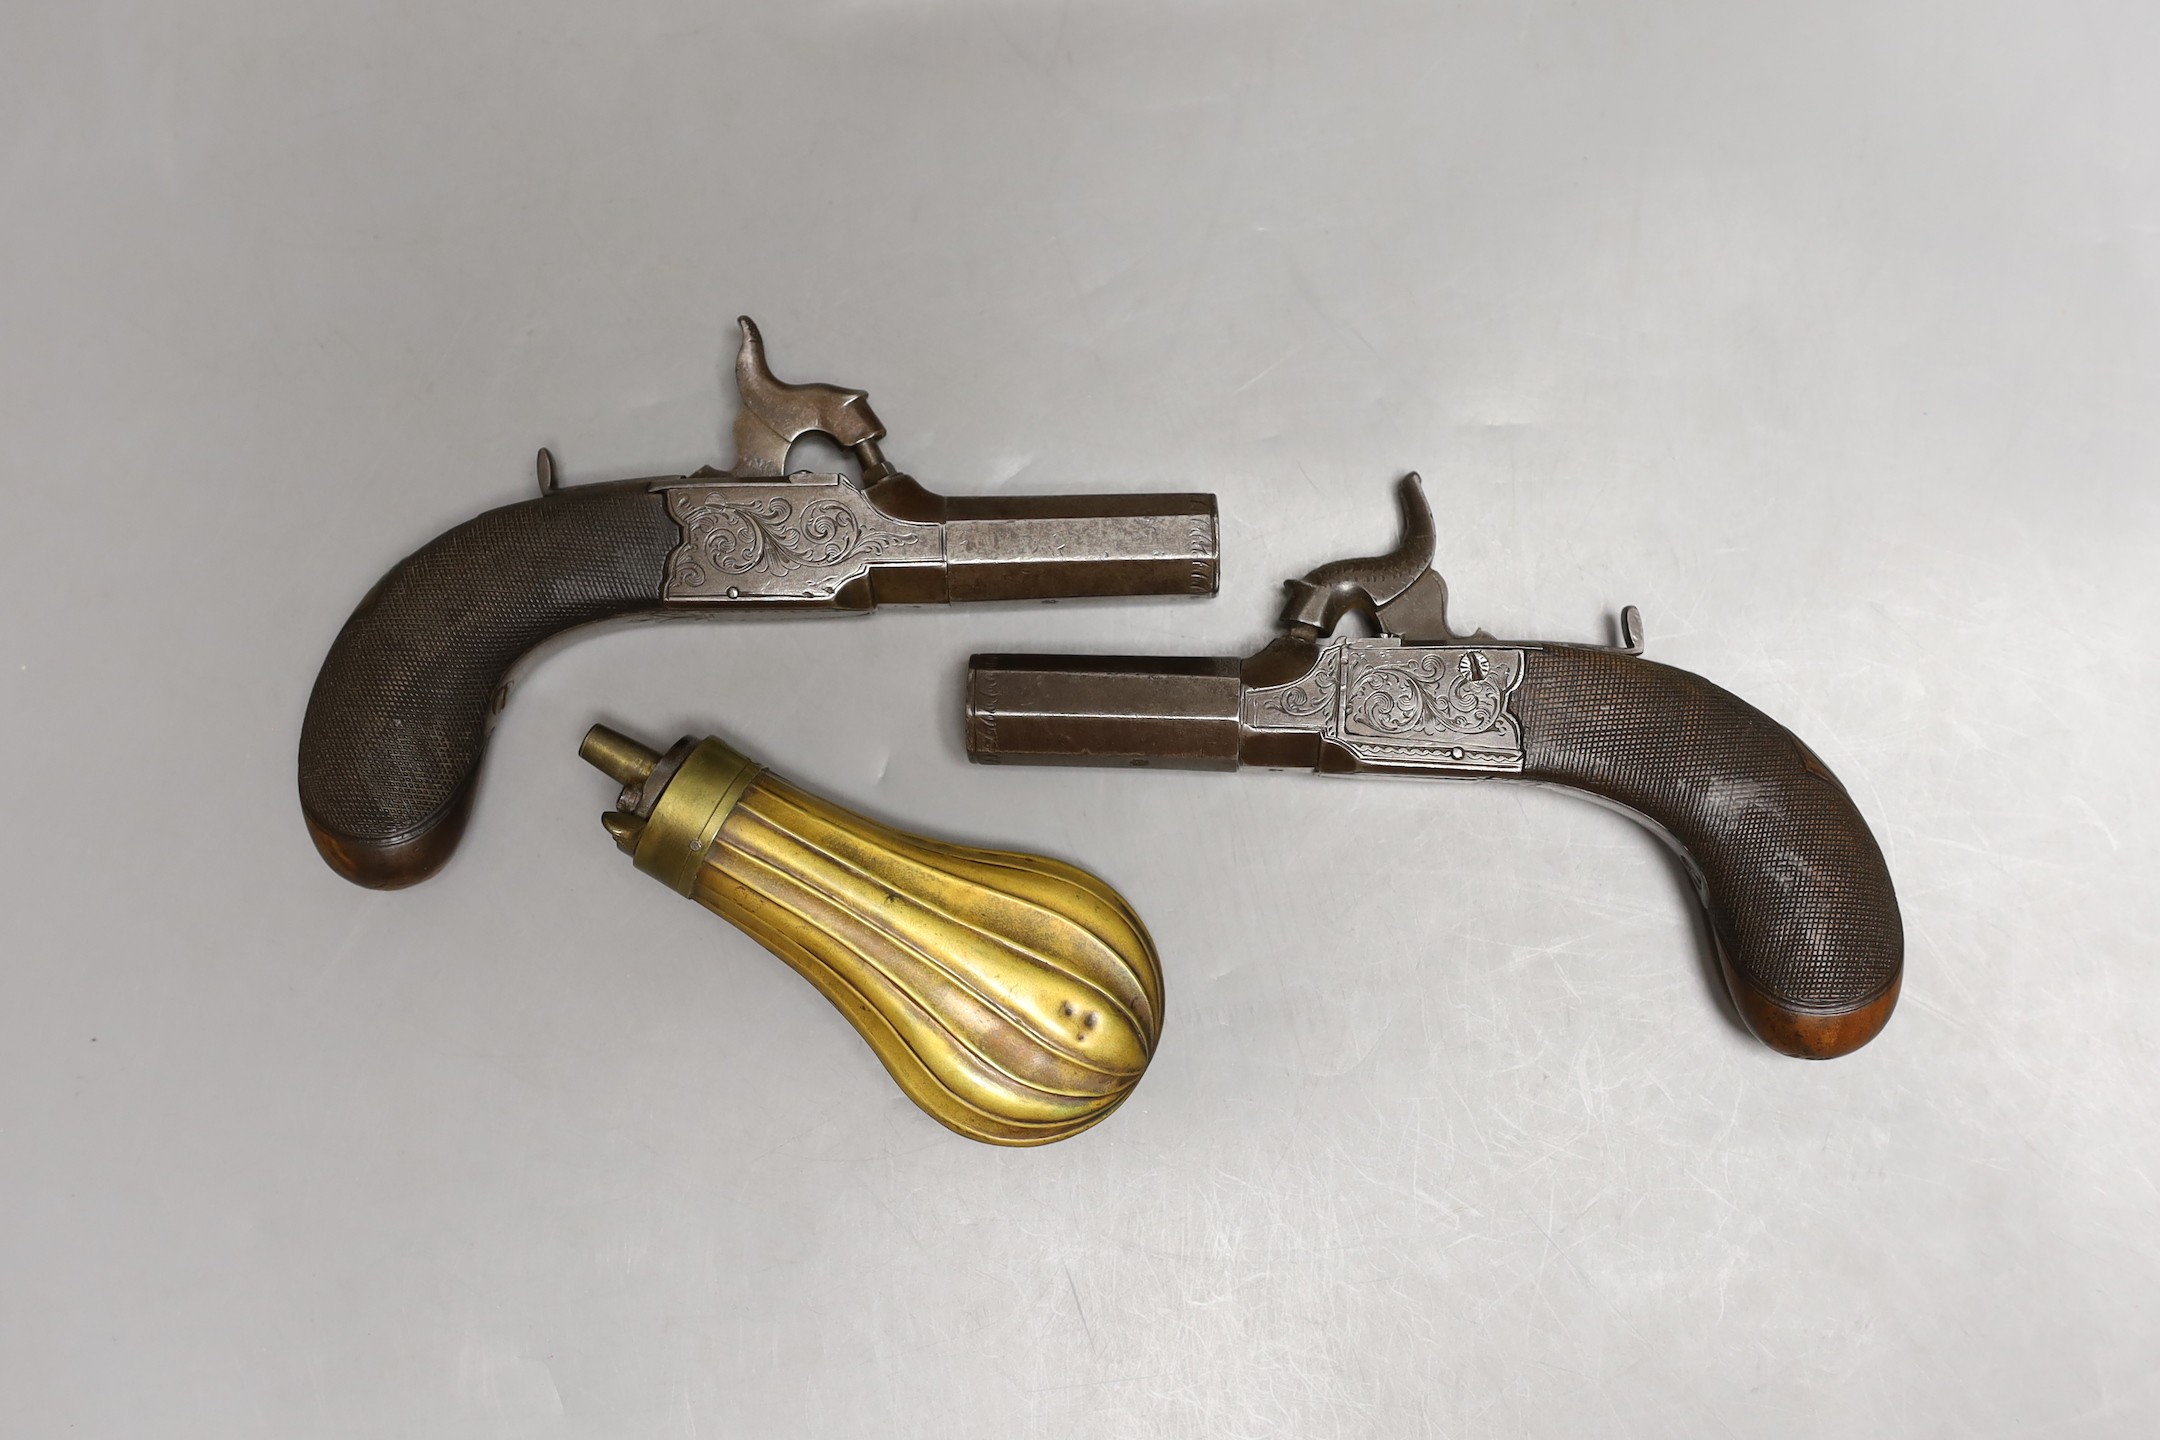 A pair of muff pistols and powder flask, original fitted mahogany case and key, circa 1830